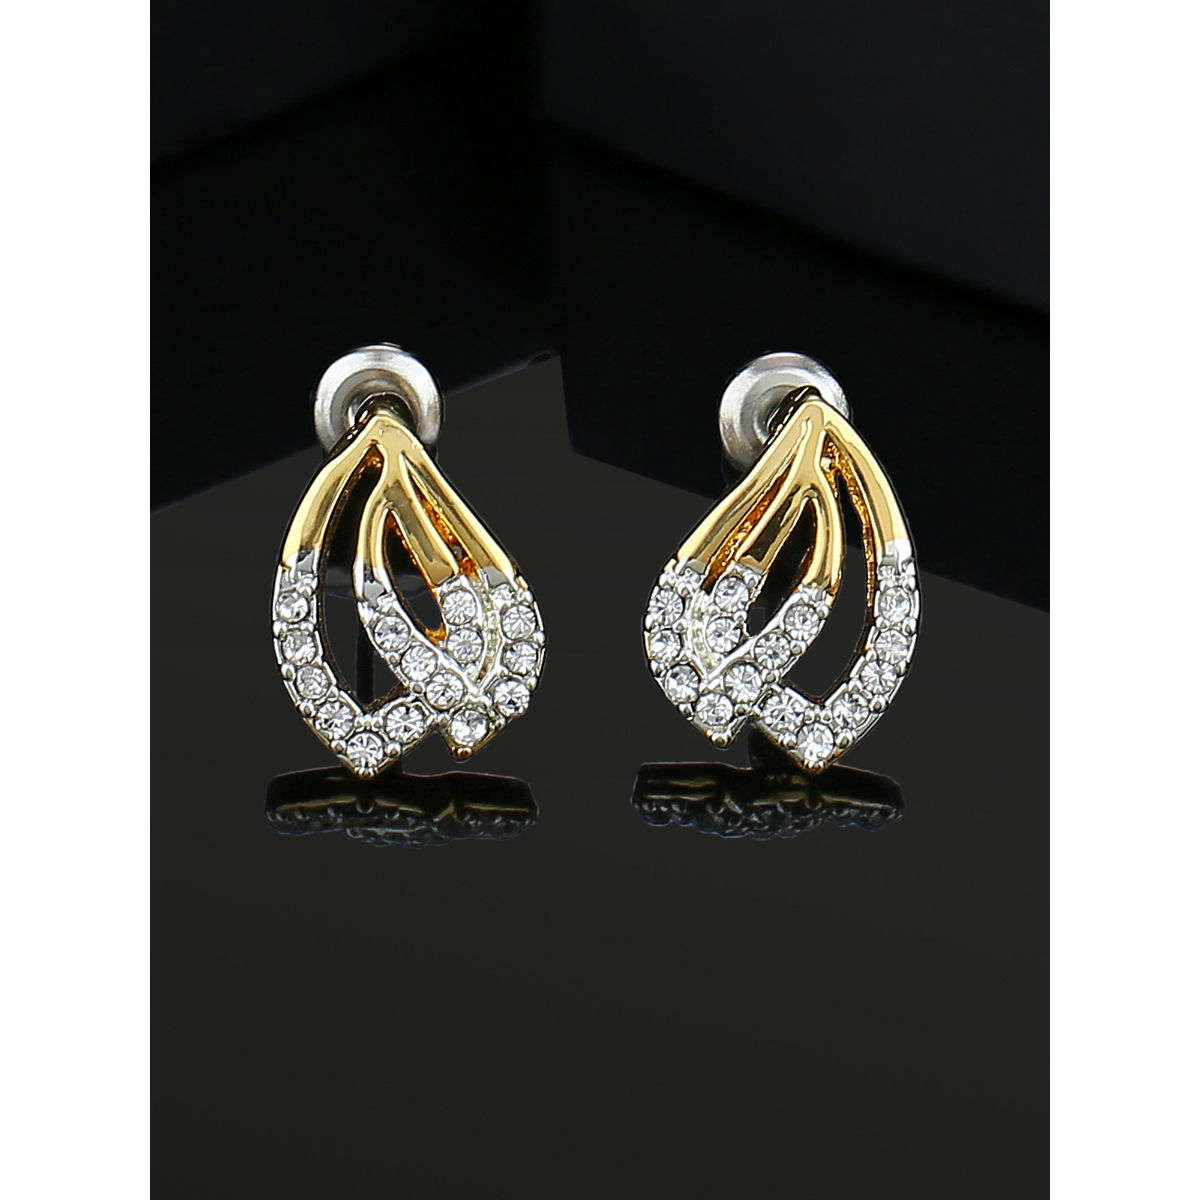 Estele Gold Plated Gorgeous Stud Earrings with Crystals for Women: Buy Estele  Gold Plated Gorgeous Stud Earrings with Crystals for Women Online at Best  Price in India